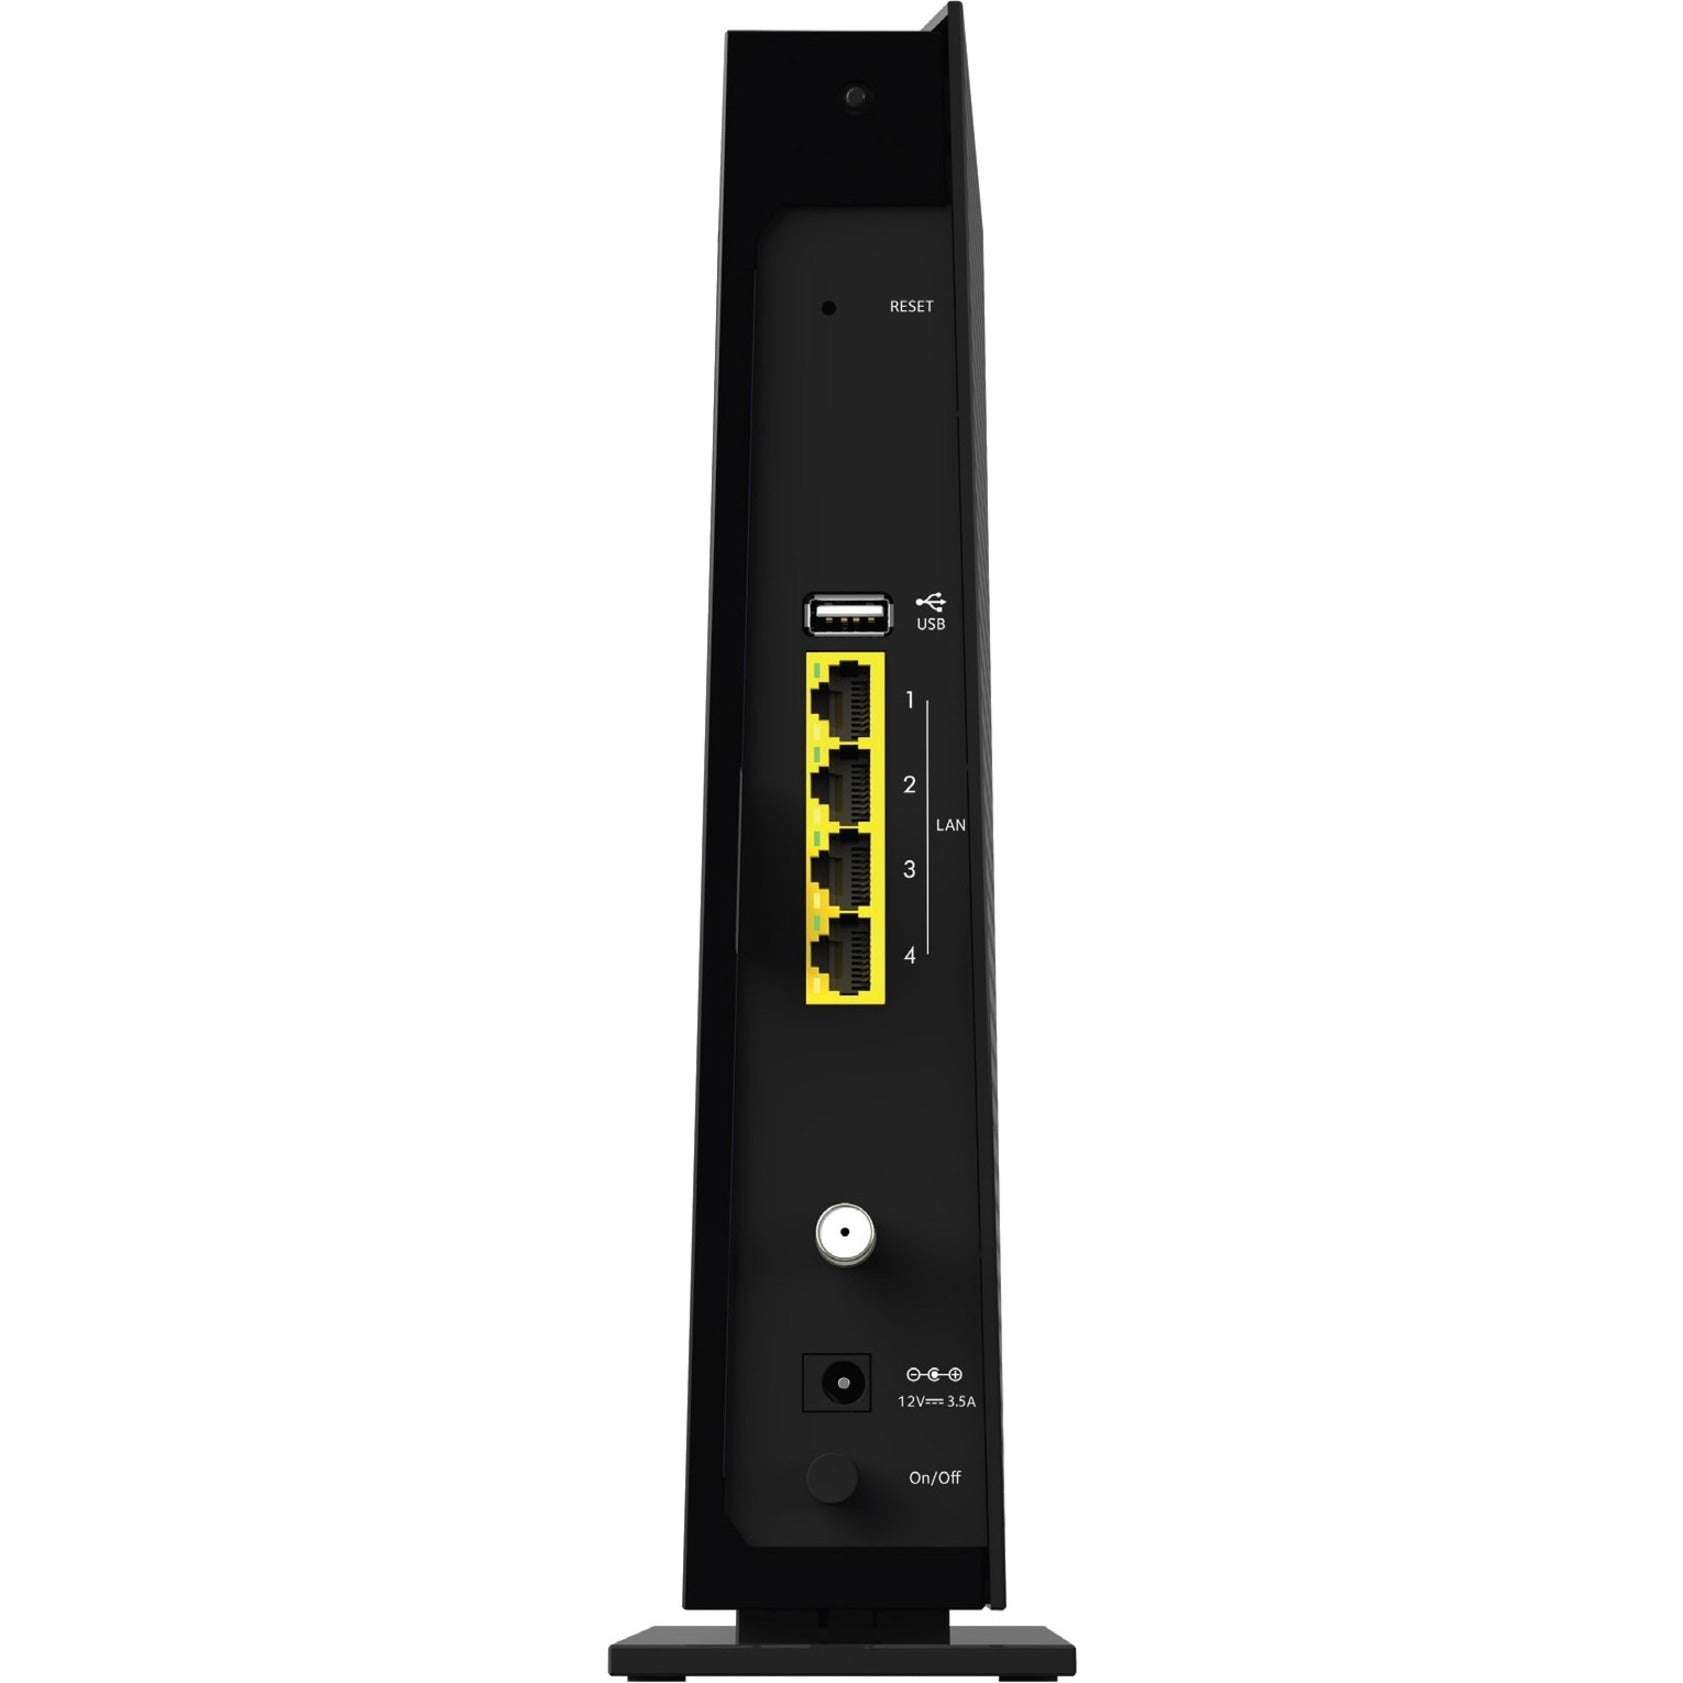 Netgear C6300-100NAS AC1750 WiFi Cable Modem Router, Dual Band Gigabit Wireless Router with 4 Ethernet Ports